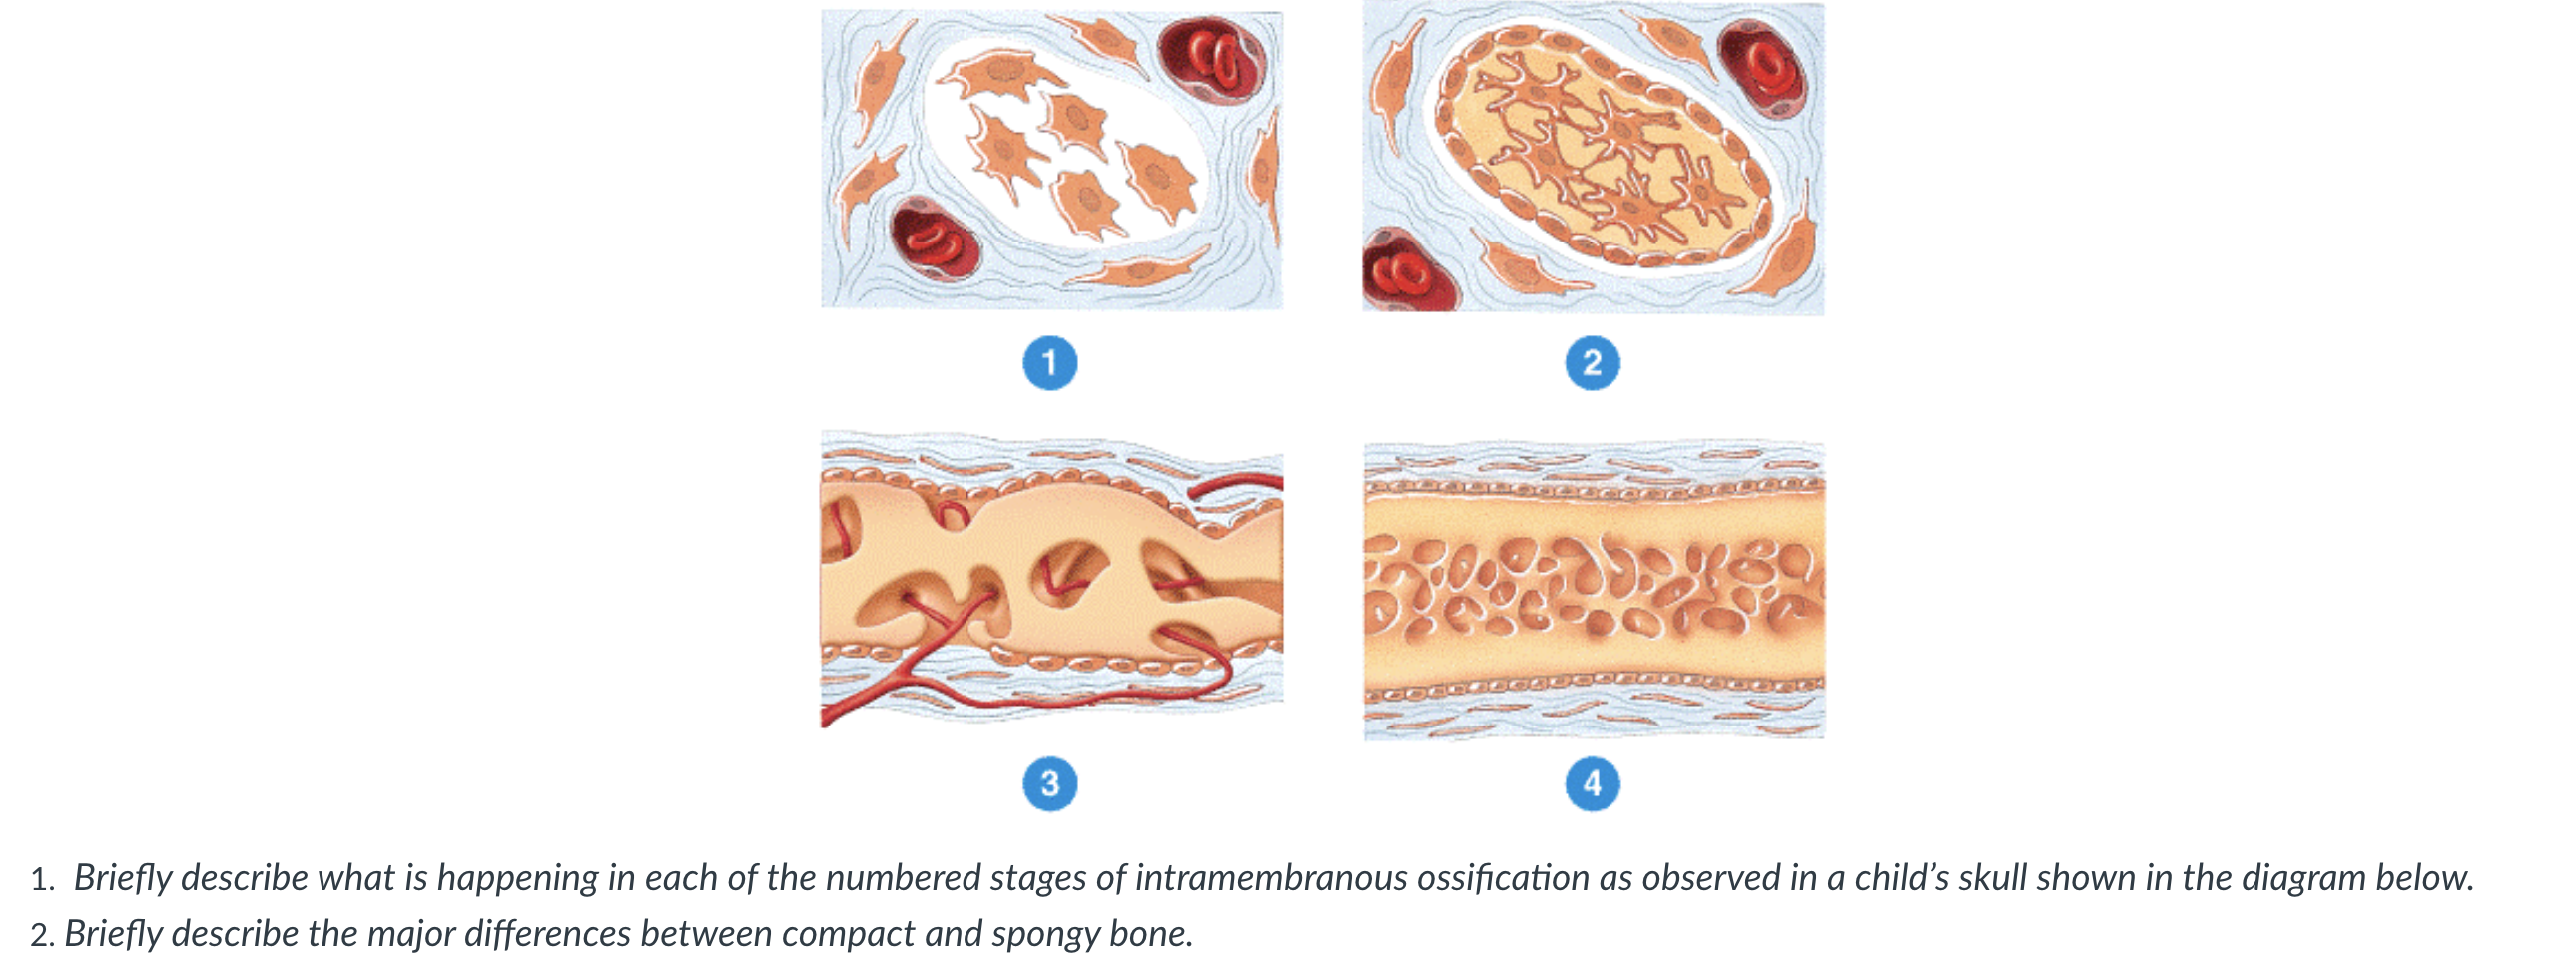 intramembranous ossification stages